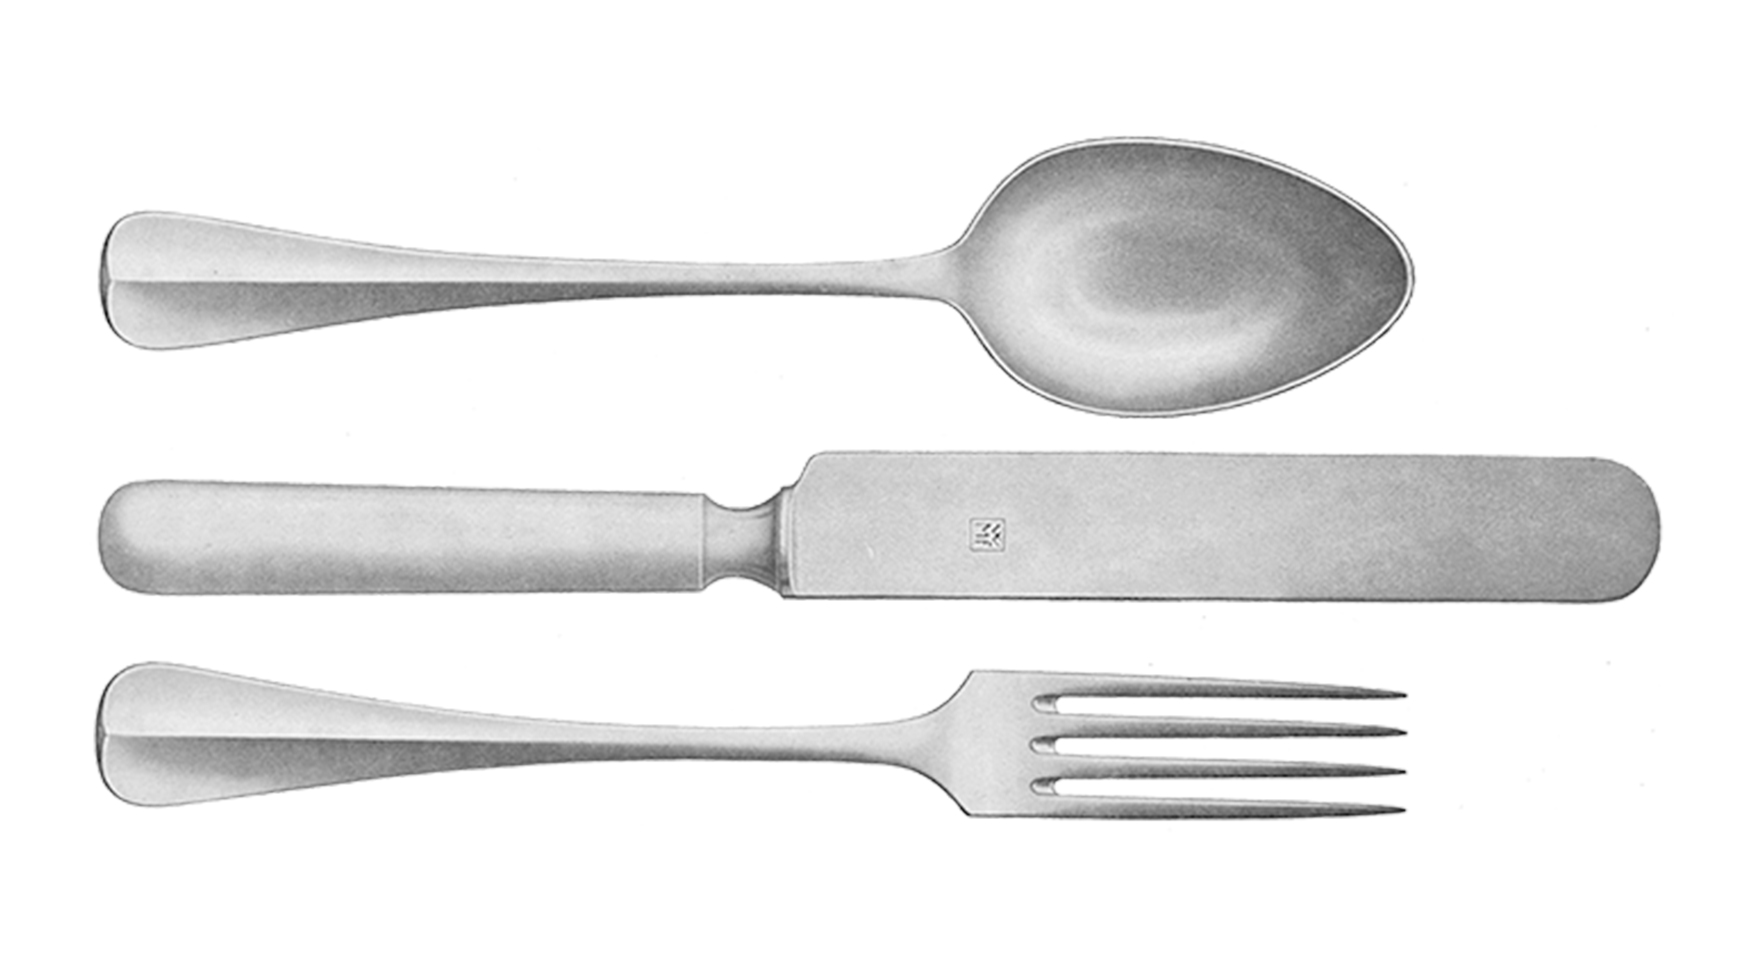 1883 - The glassworks are established + the first WMF cutlery is produced